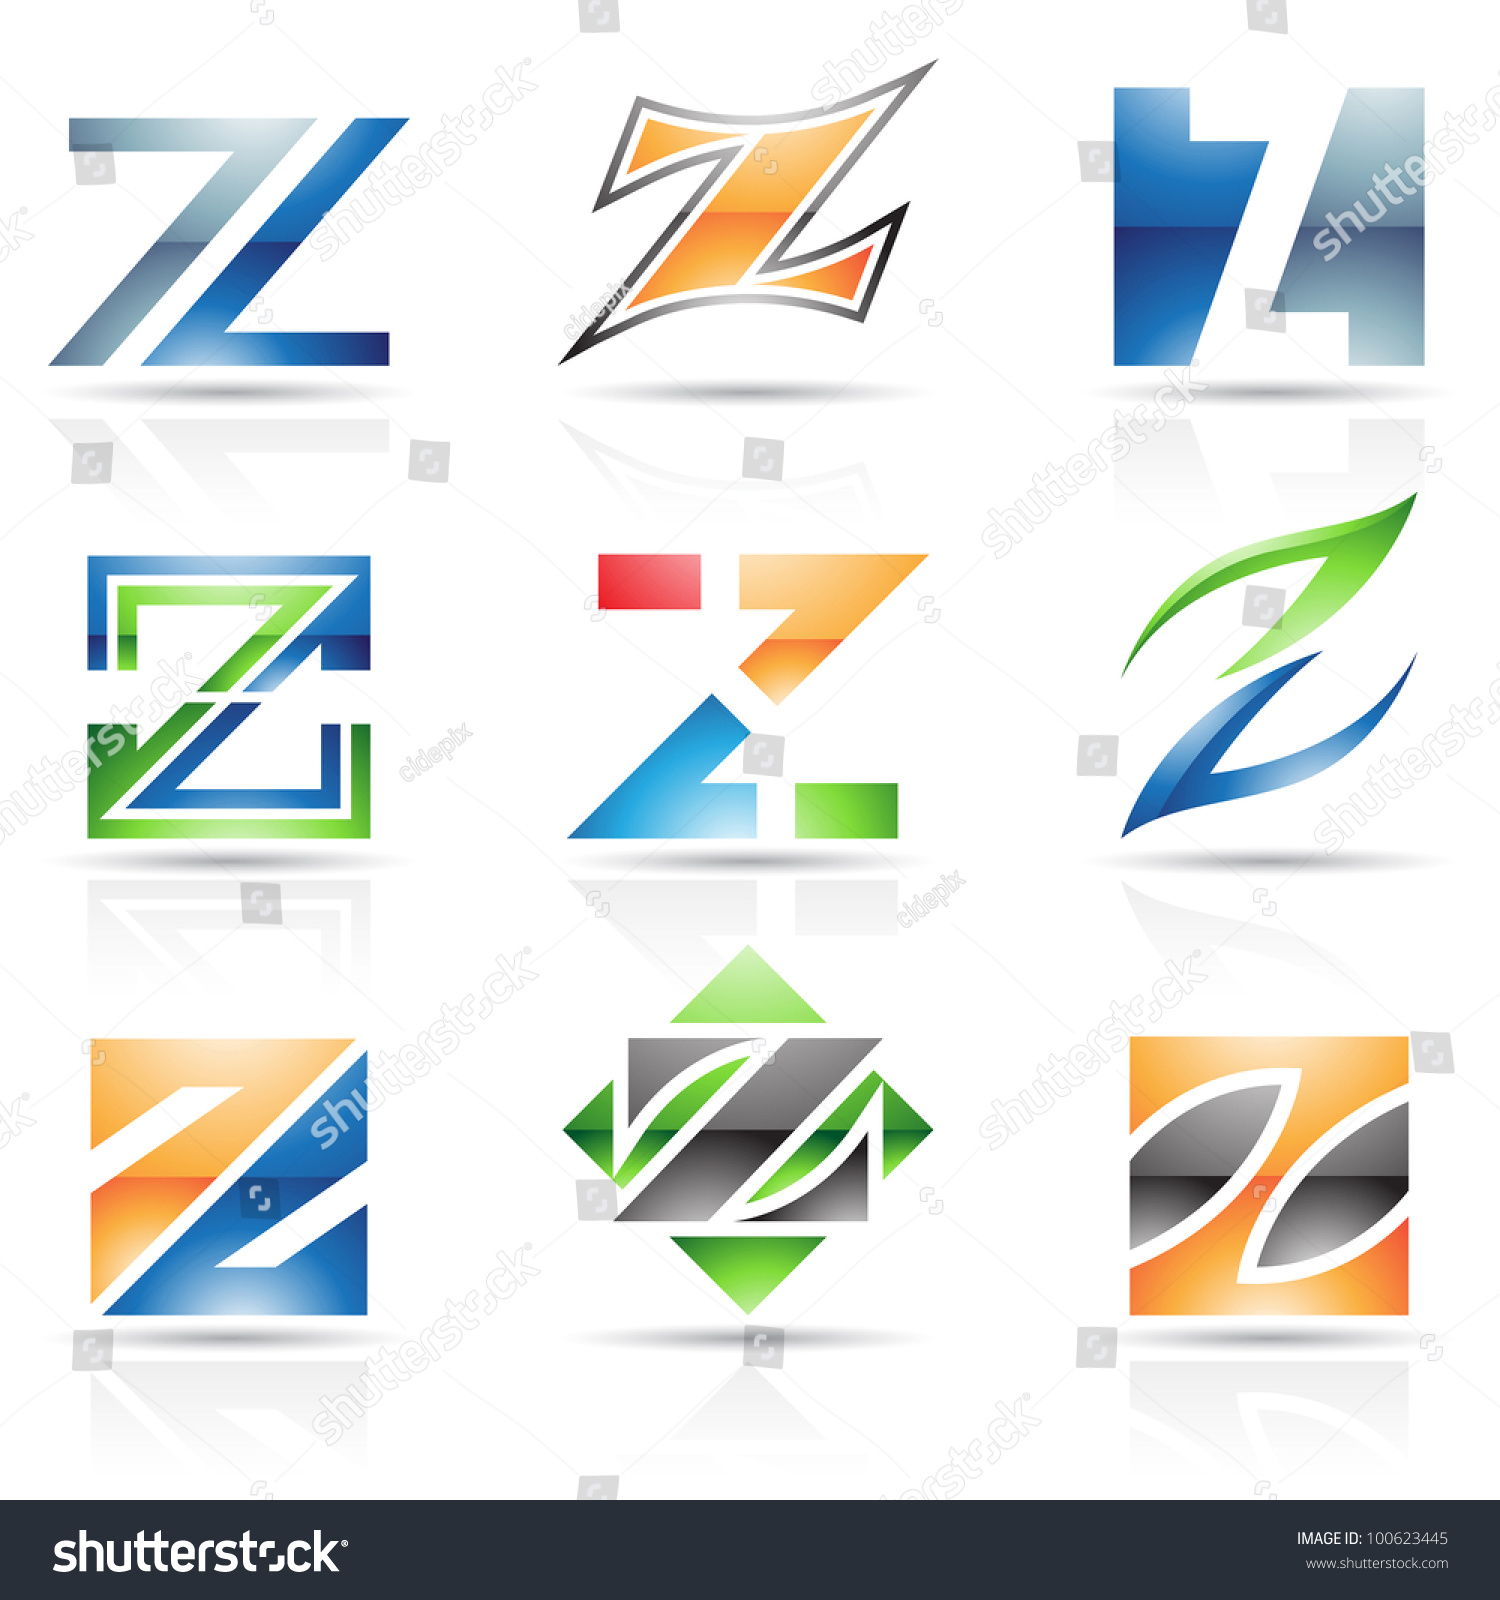 Vector Illustration Of Abstract Icons Based On The Letter Z - 100623445